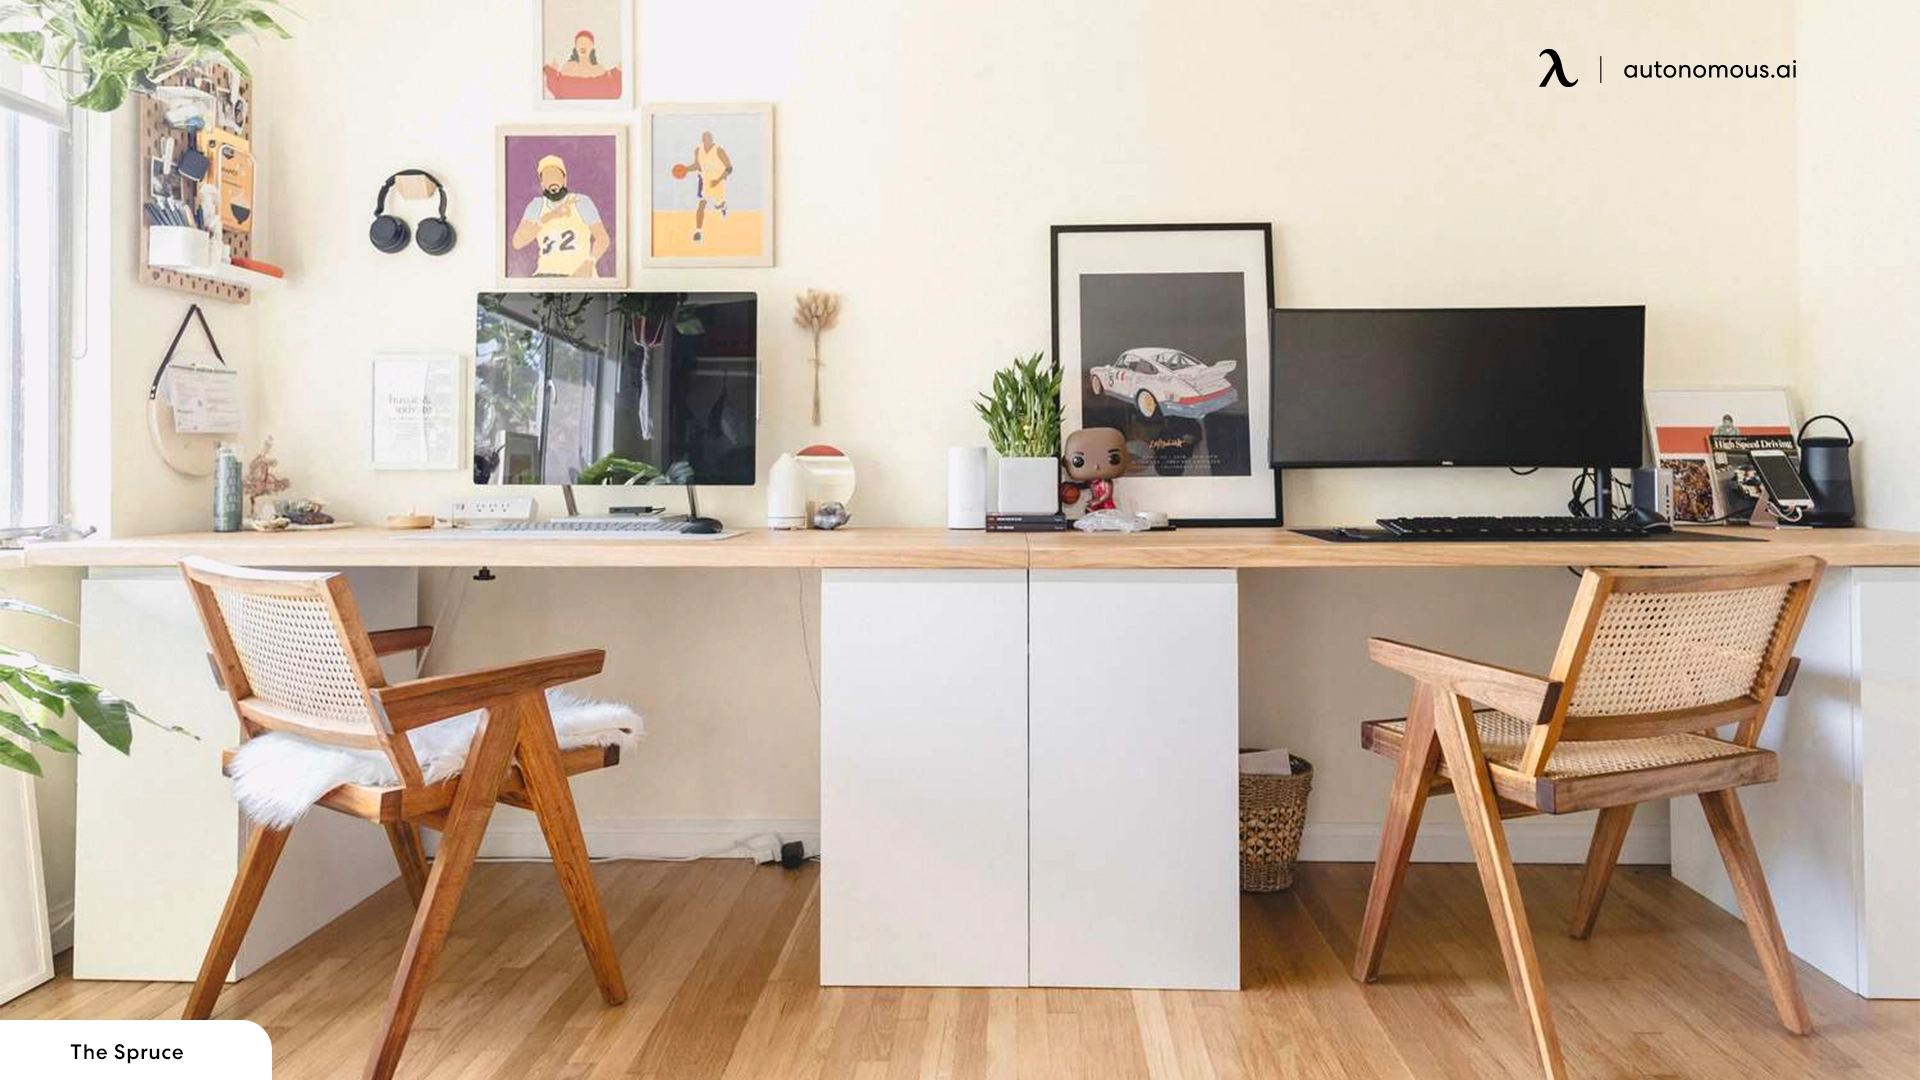 Why Consider Alternative Uses for Your Desk Cabinet?